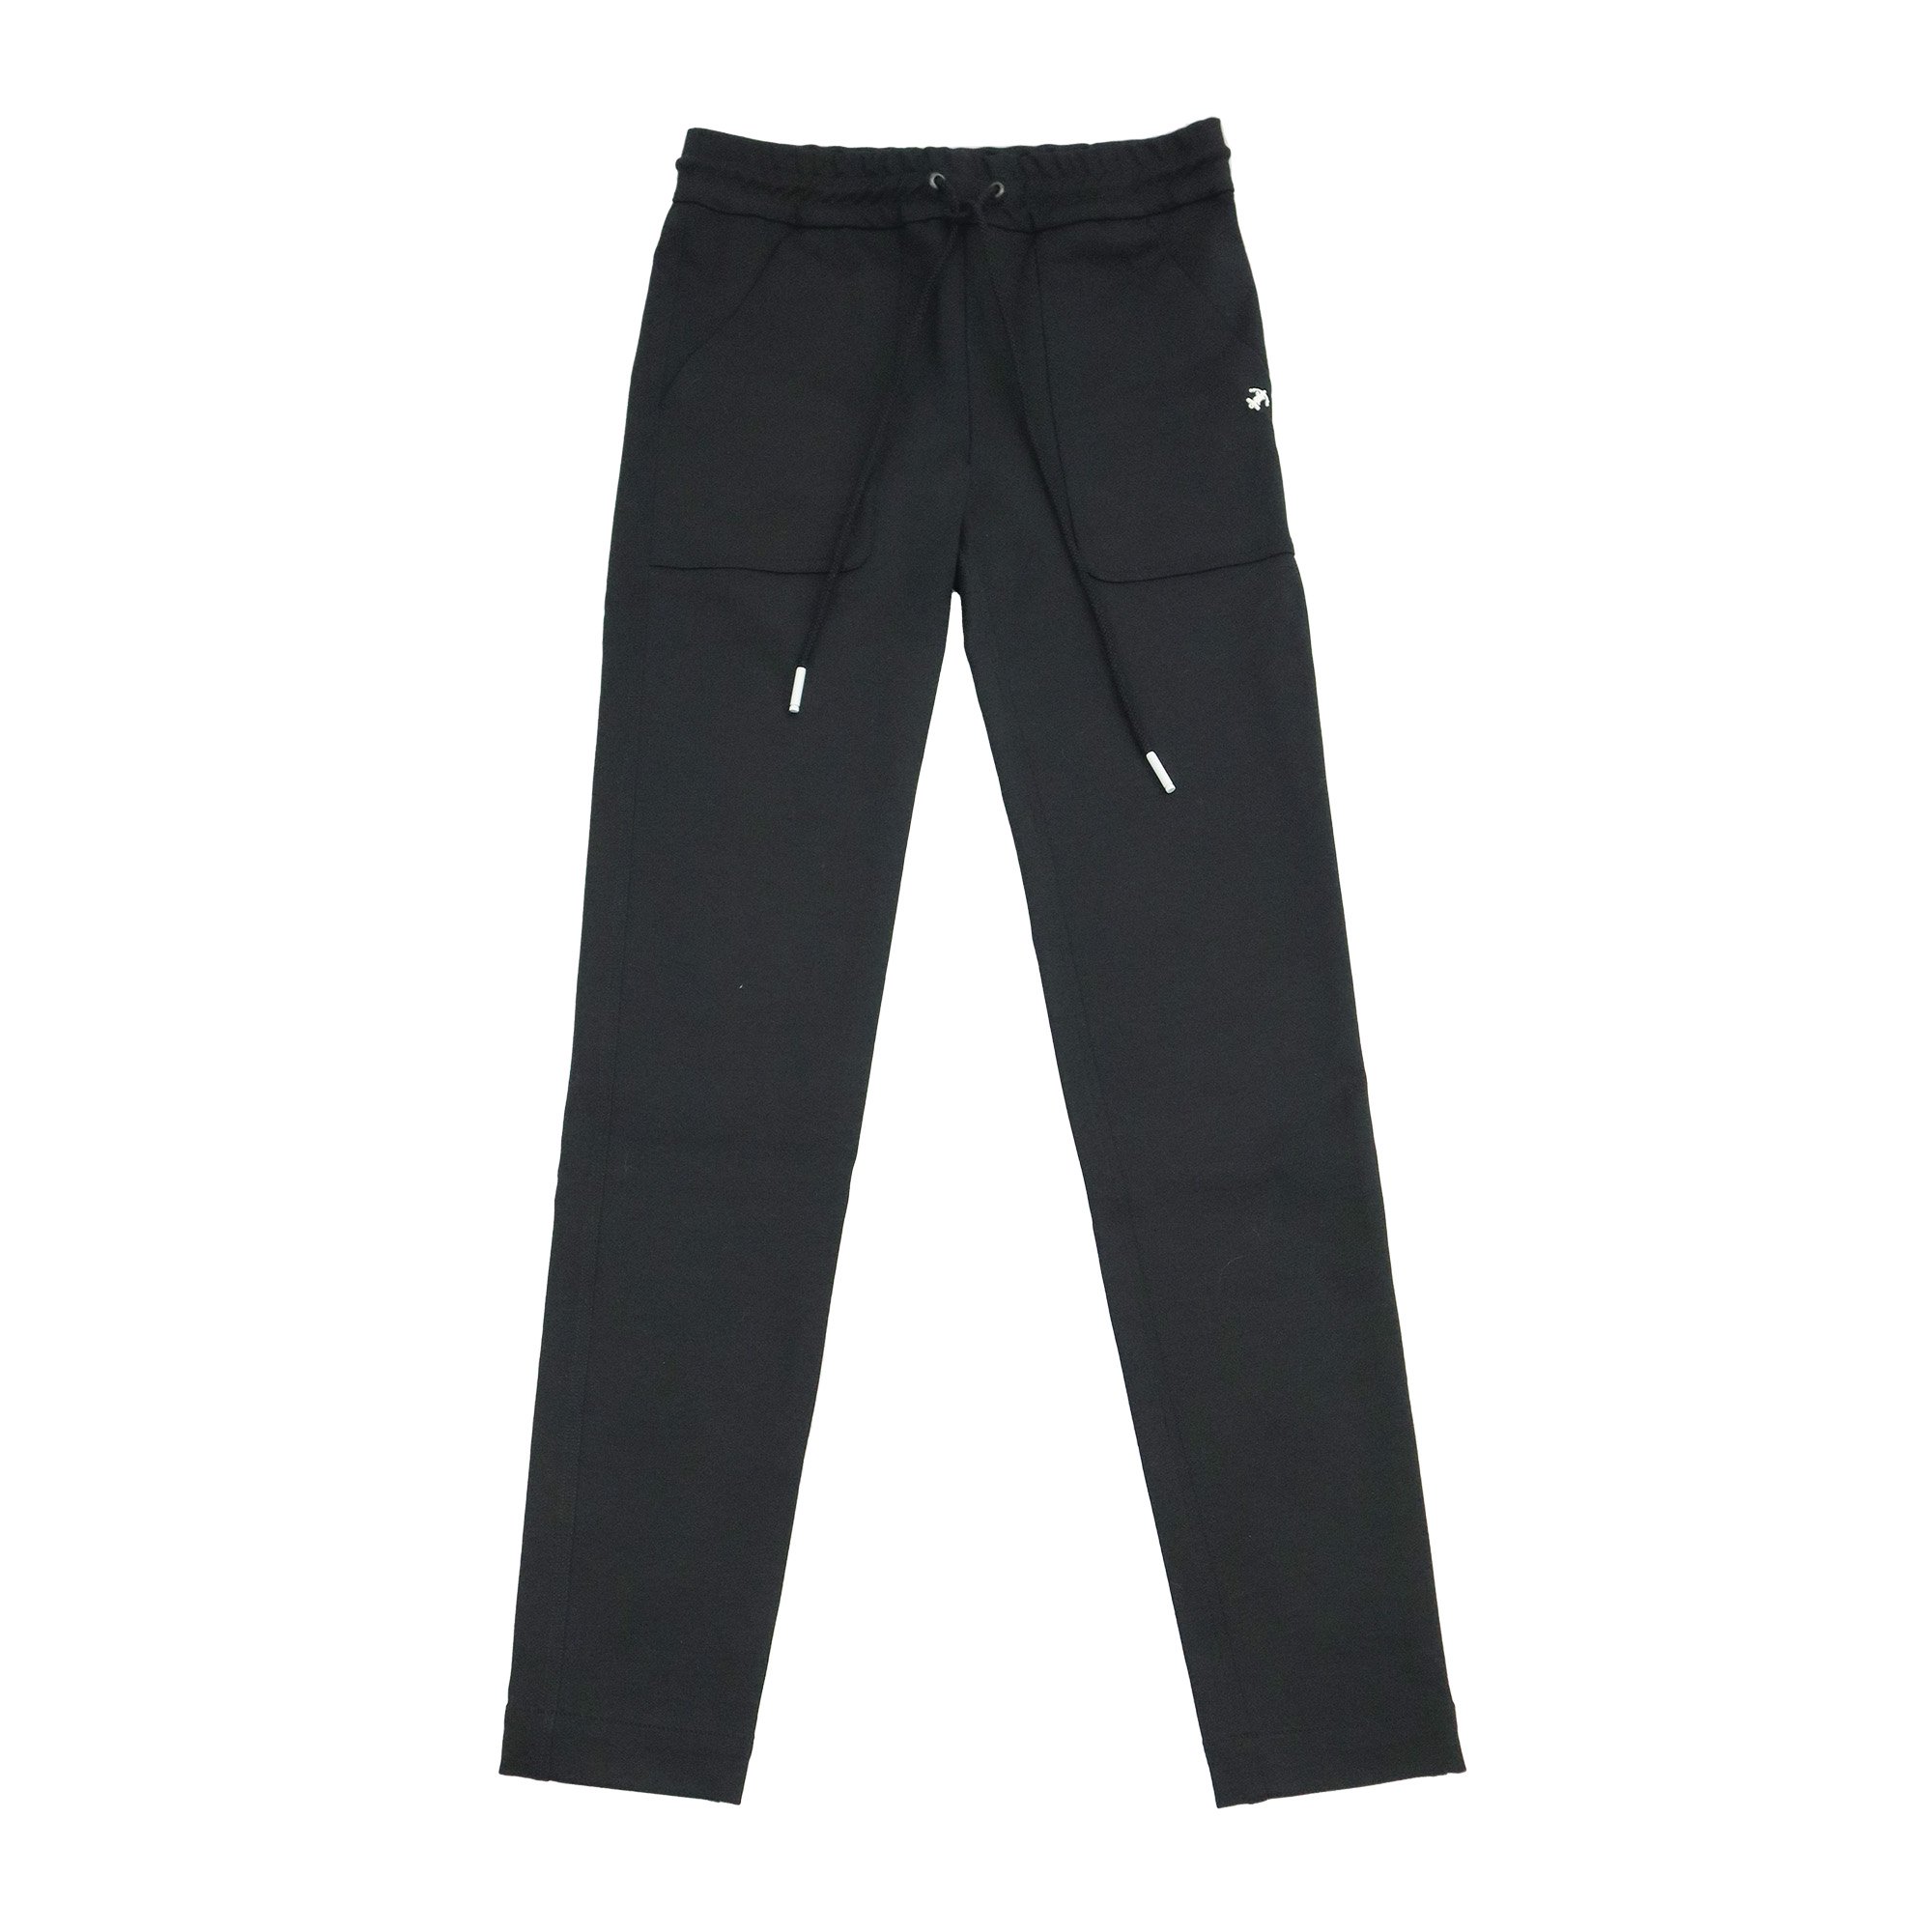 <img class='new_mark_img1' src='https://img.shop-pro.jp/img/new/icons6.gif' style='border:none;display:inline;margin:0px;padding:0px;width:auto;' />THE RERACS PANTS【BLACK】